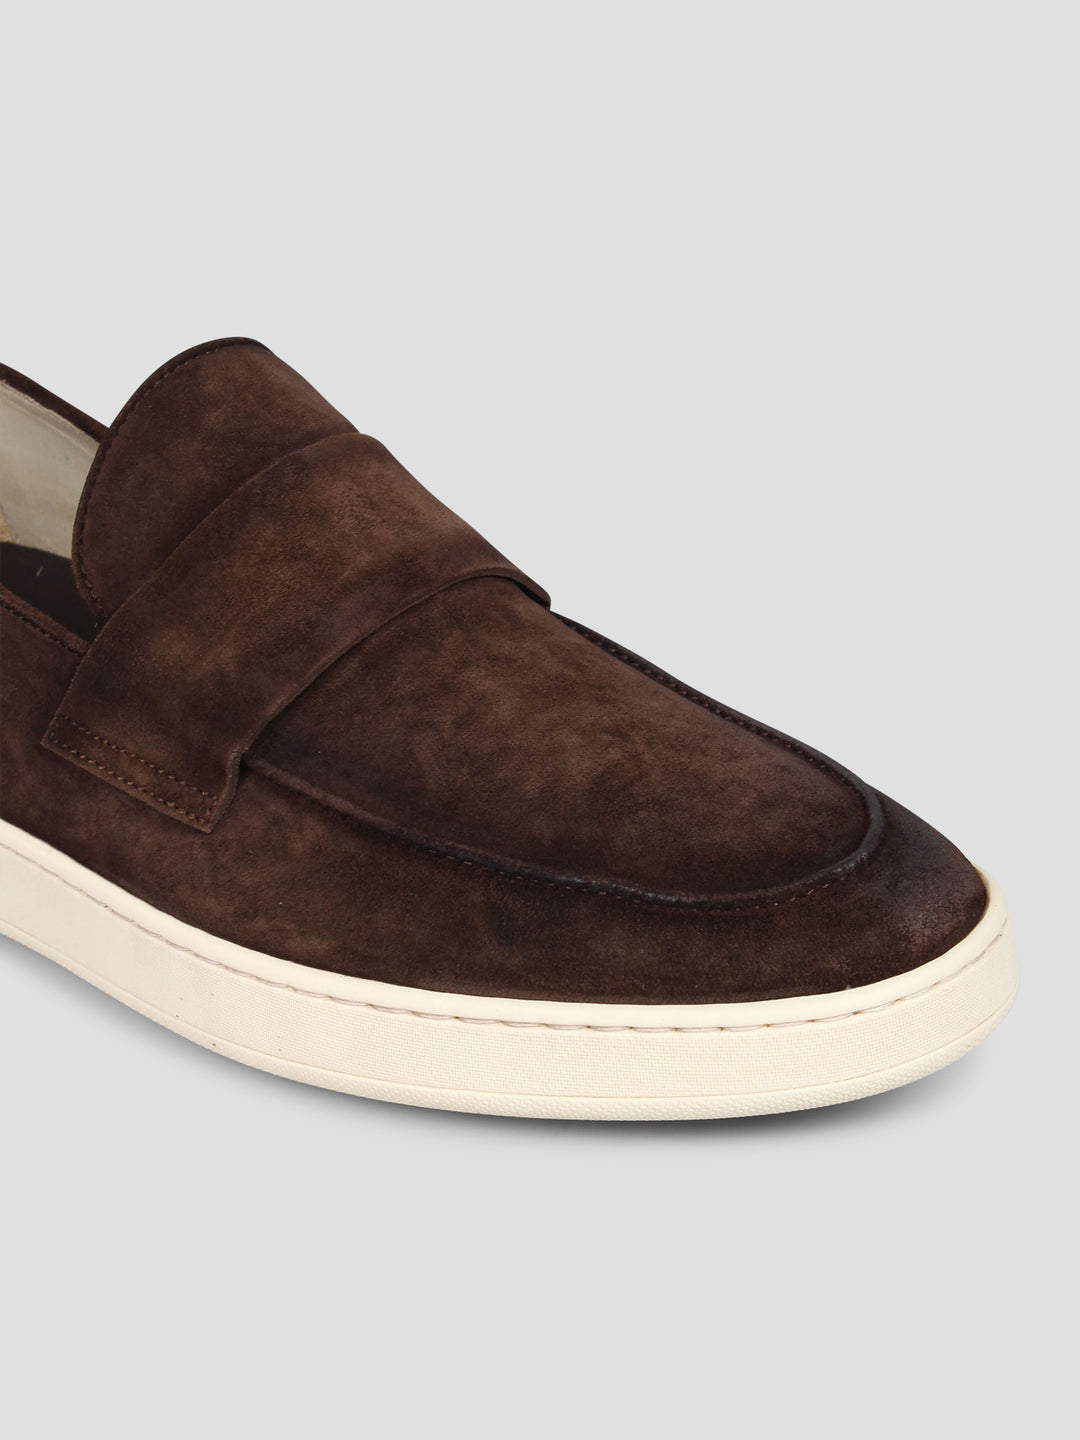 Boat penny loafers